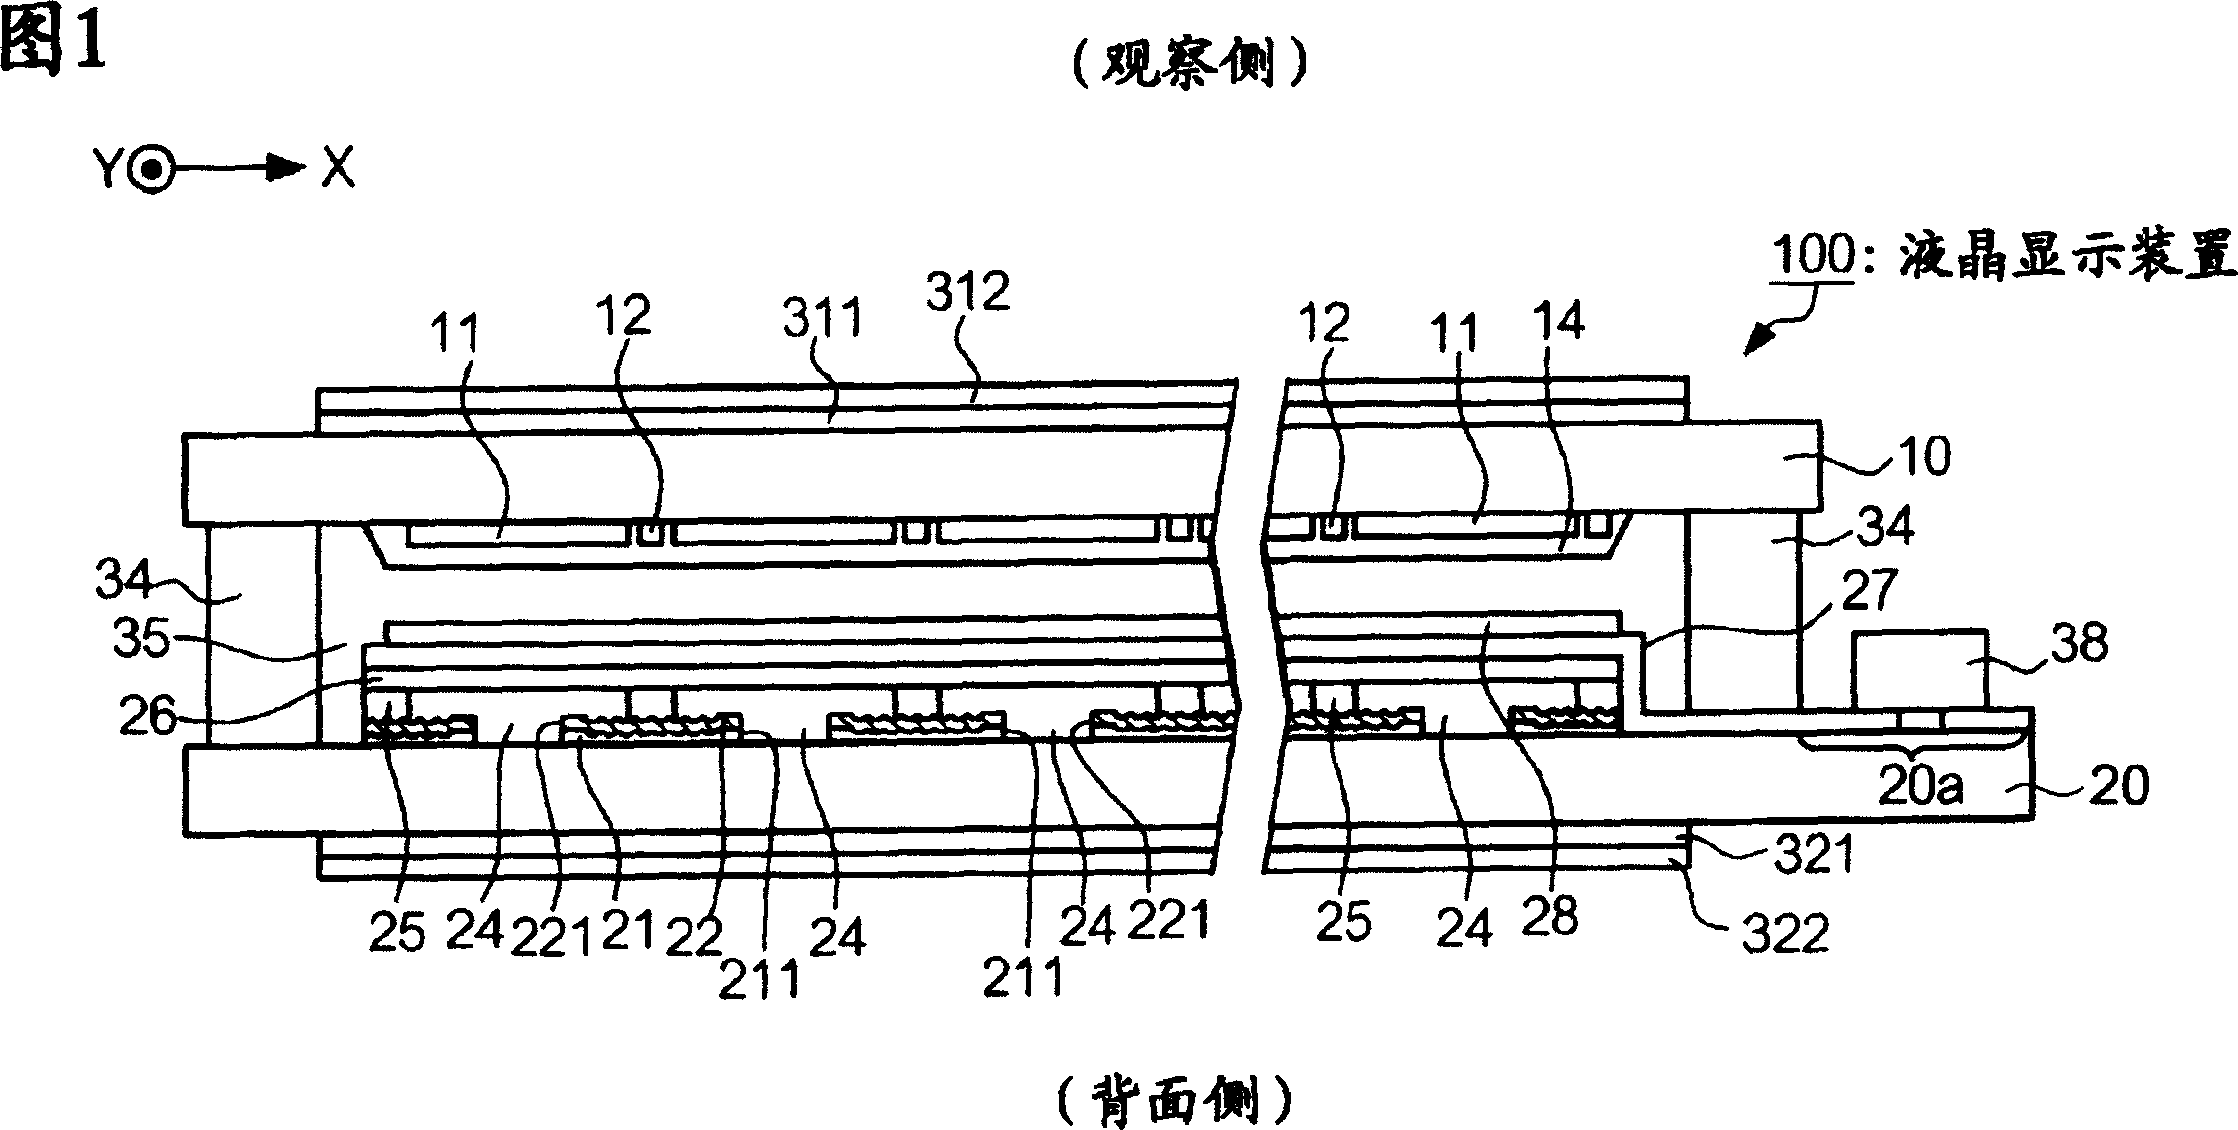 Electro-optic device, substrate for electro-optic device and method for manufacturing the same, photomask, and electronic device